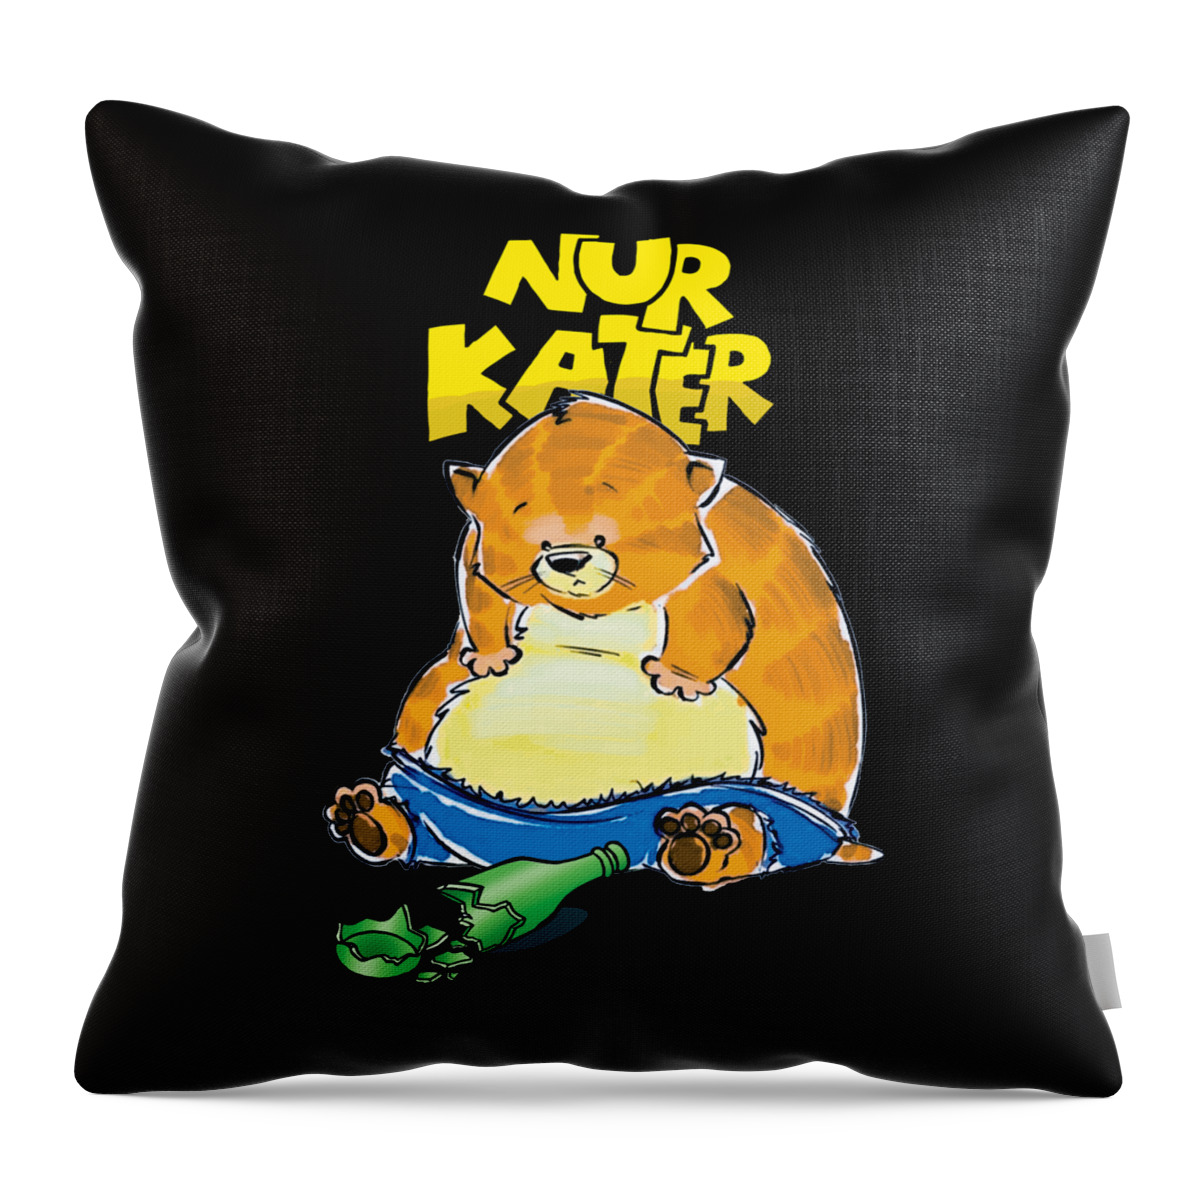 Kater Throw Pillow featuring the digital art Nur Kater by Yavor Mihaylov